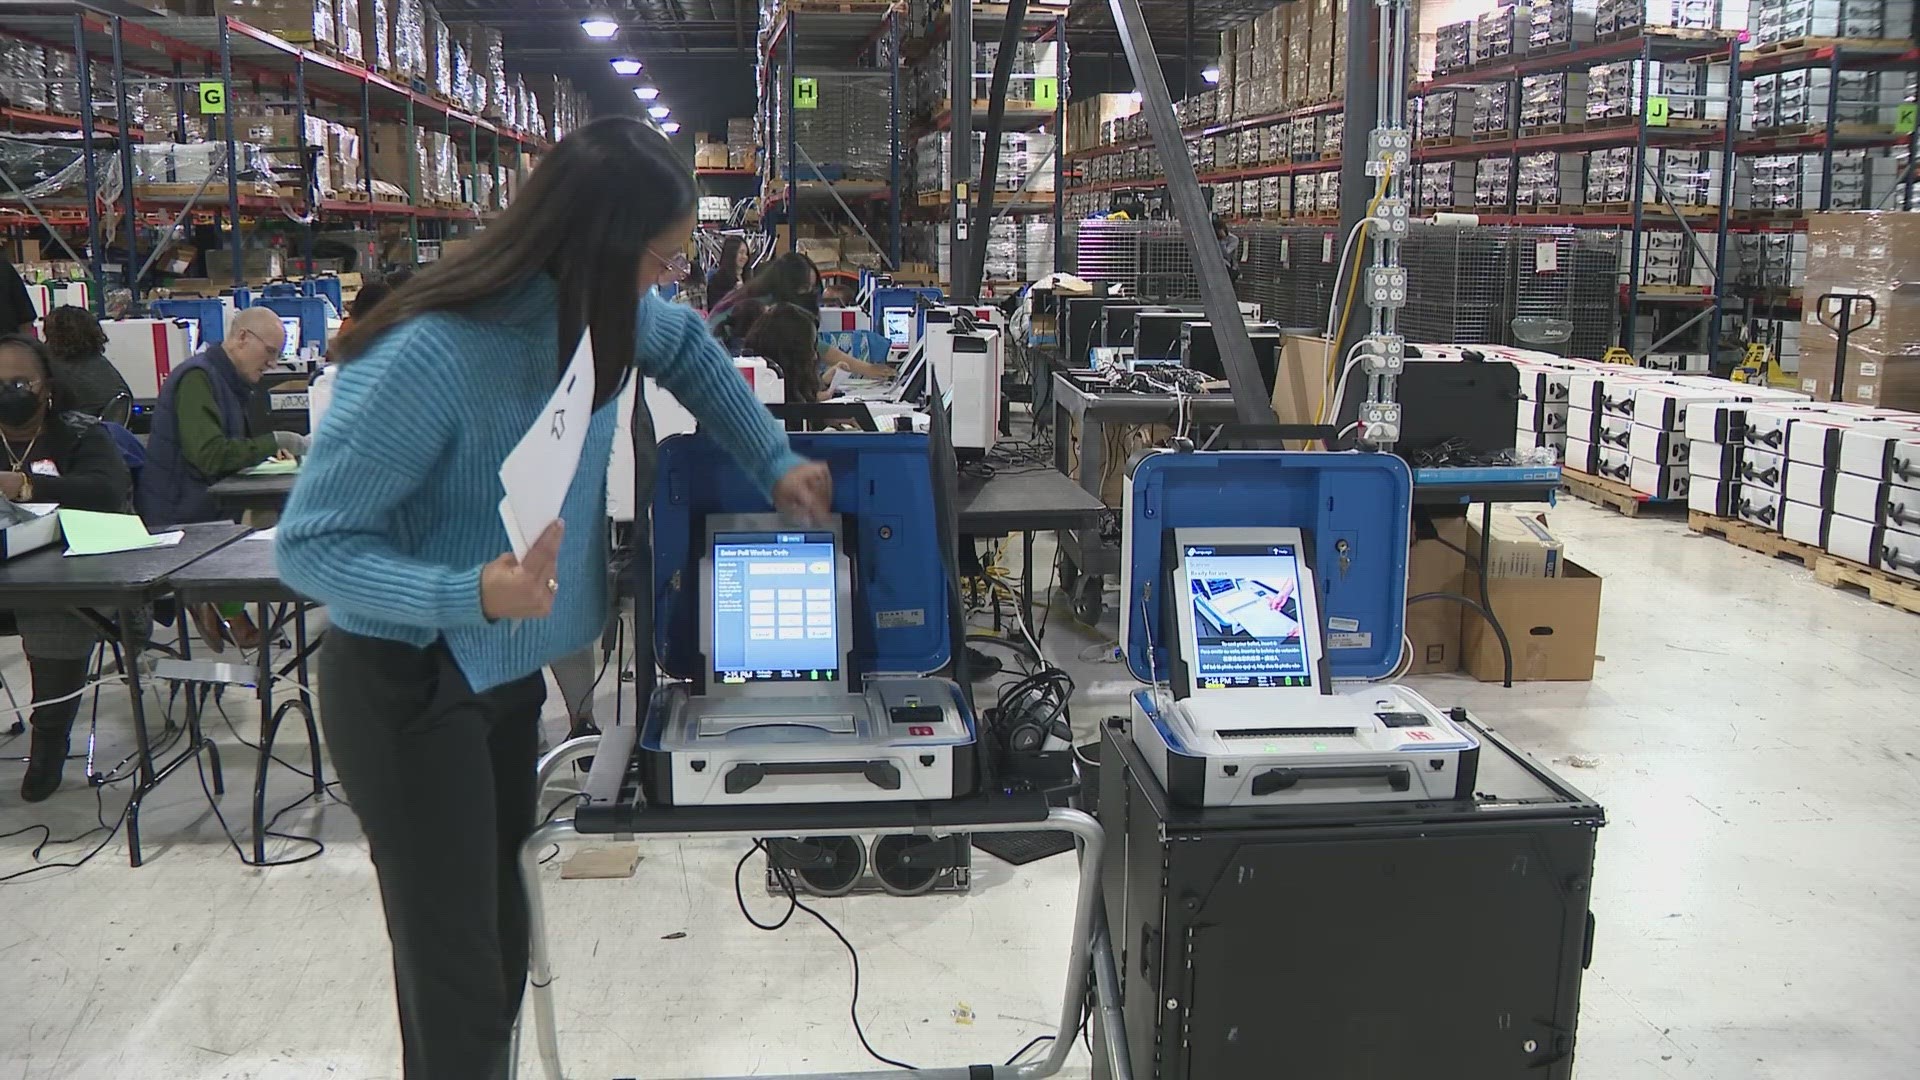 On Wednesday, Harris County election officials conducted the logic and accuracy testing for voting machines as required by state law.